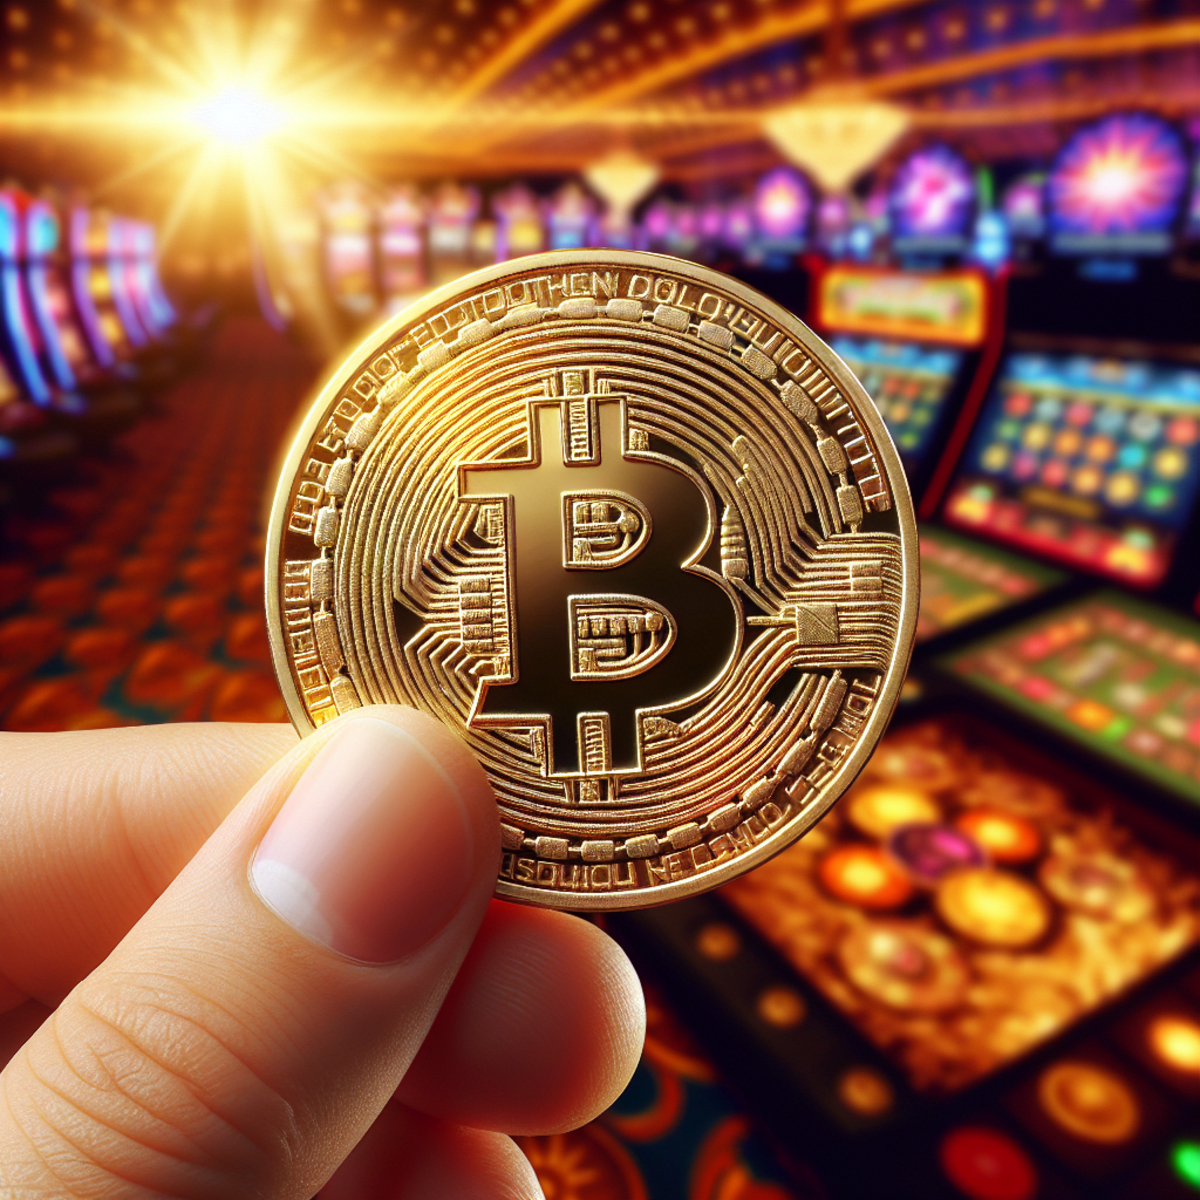 Why Bet on Pai Gow Using Crypto